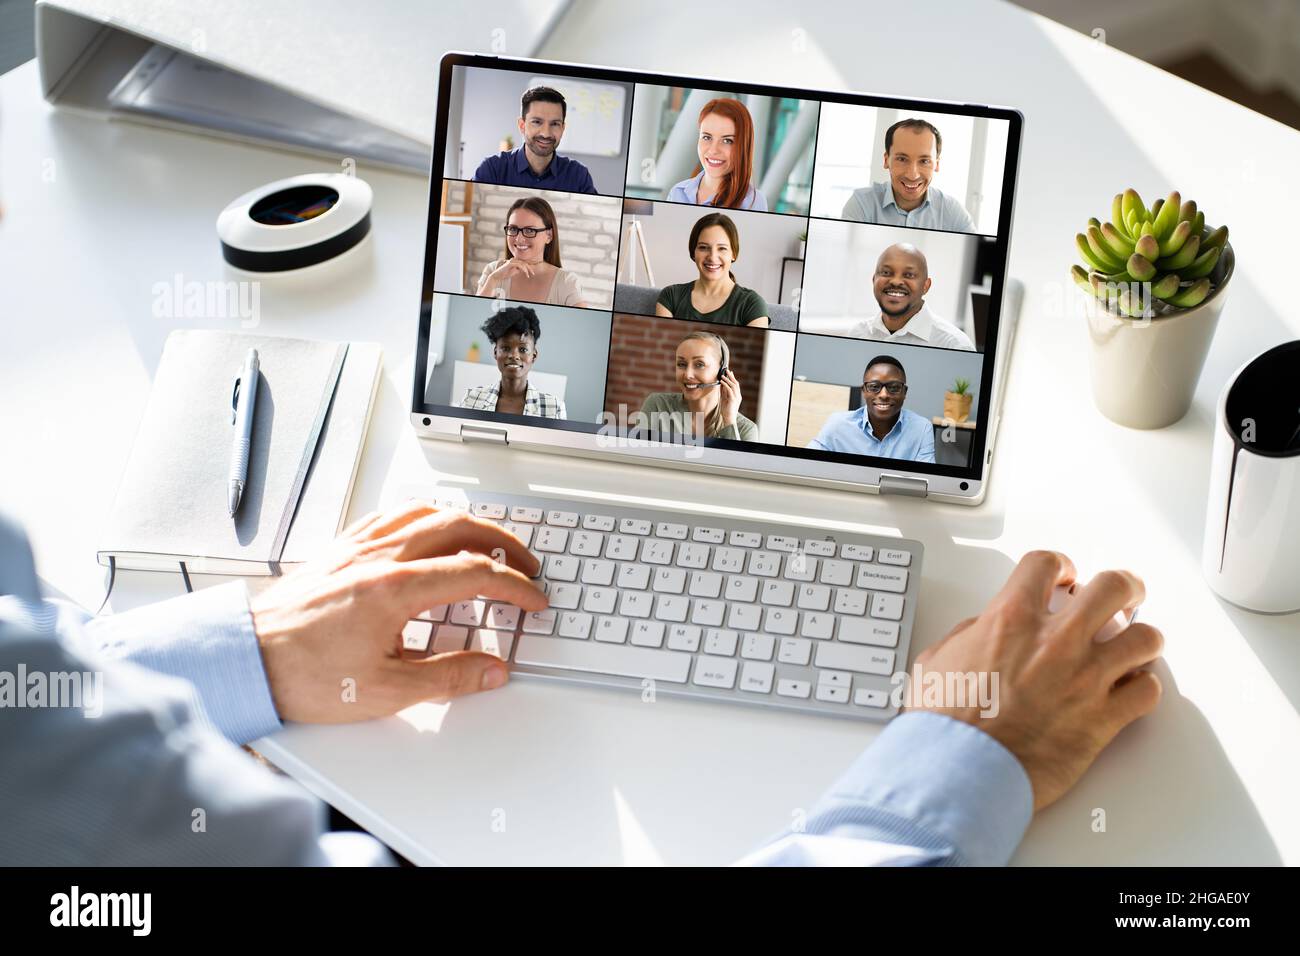 Online Digital HR Video Conference Webinar. Business Call Stock Photo